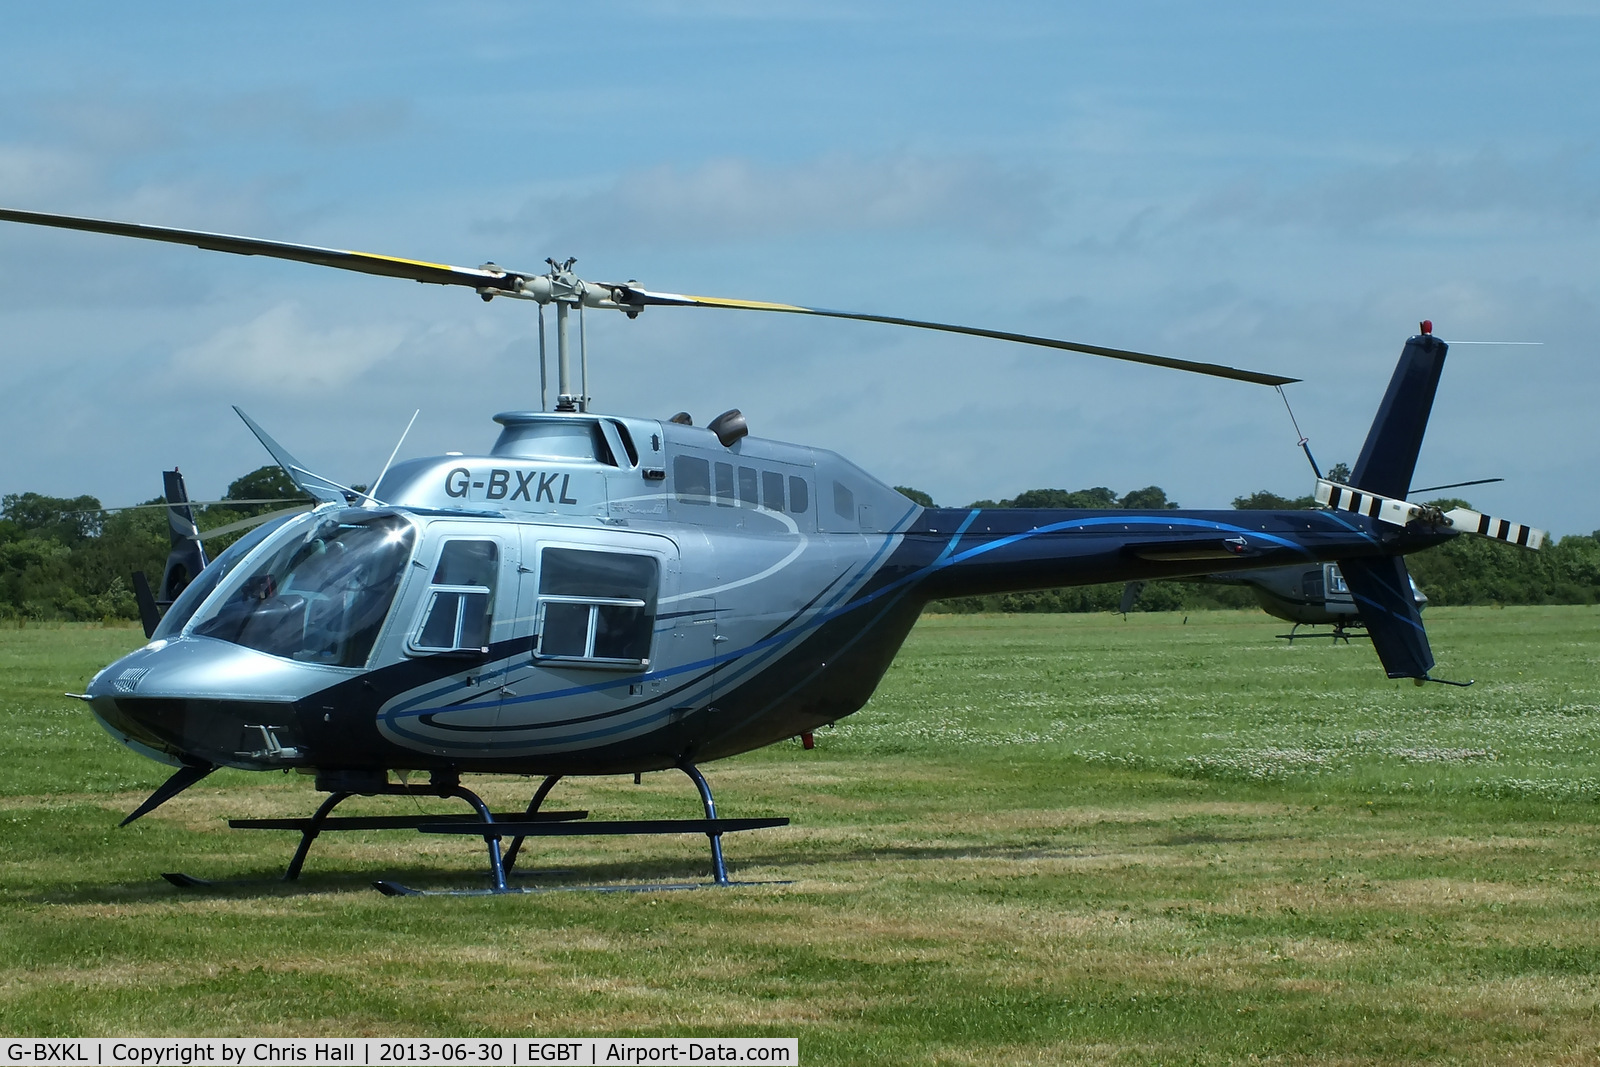 G-BXKL, 1980 Bell 206B JetRanger II C/N 3006, being used for ferrying race fans to the British F1 Grand Prix at Silverstone